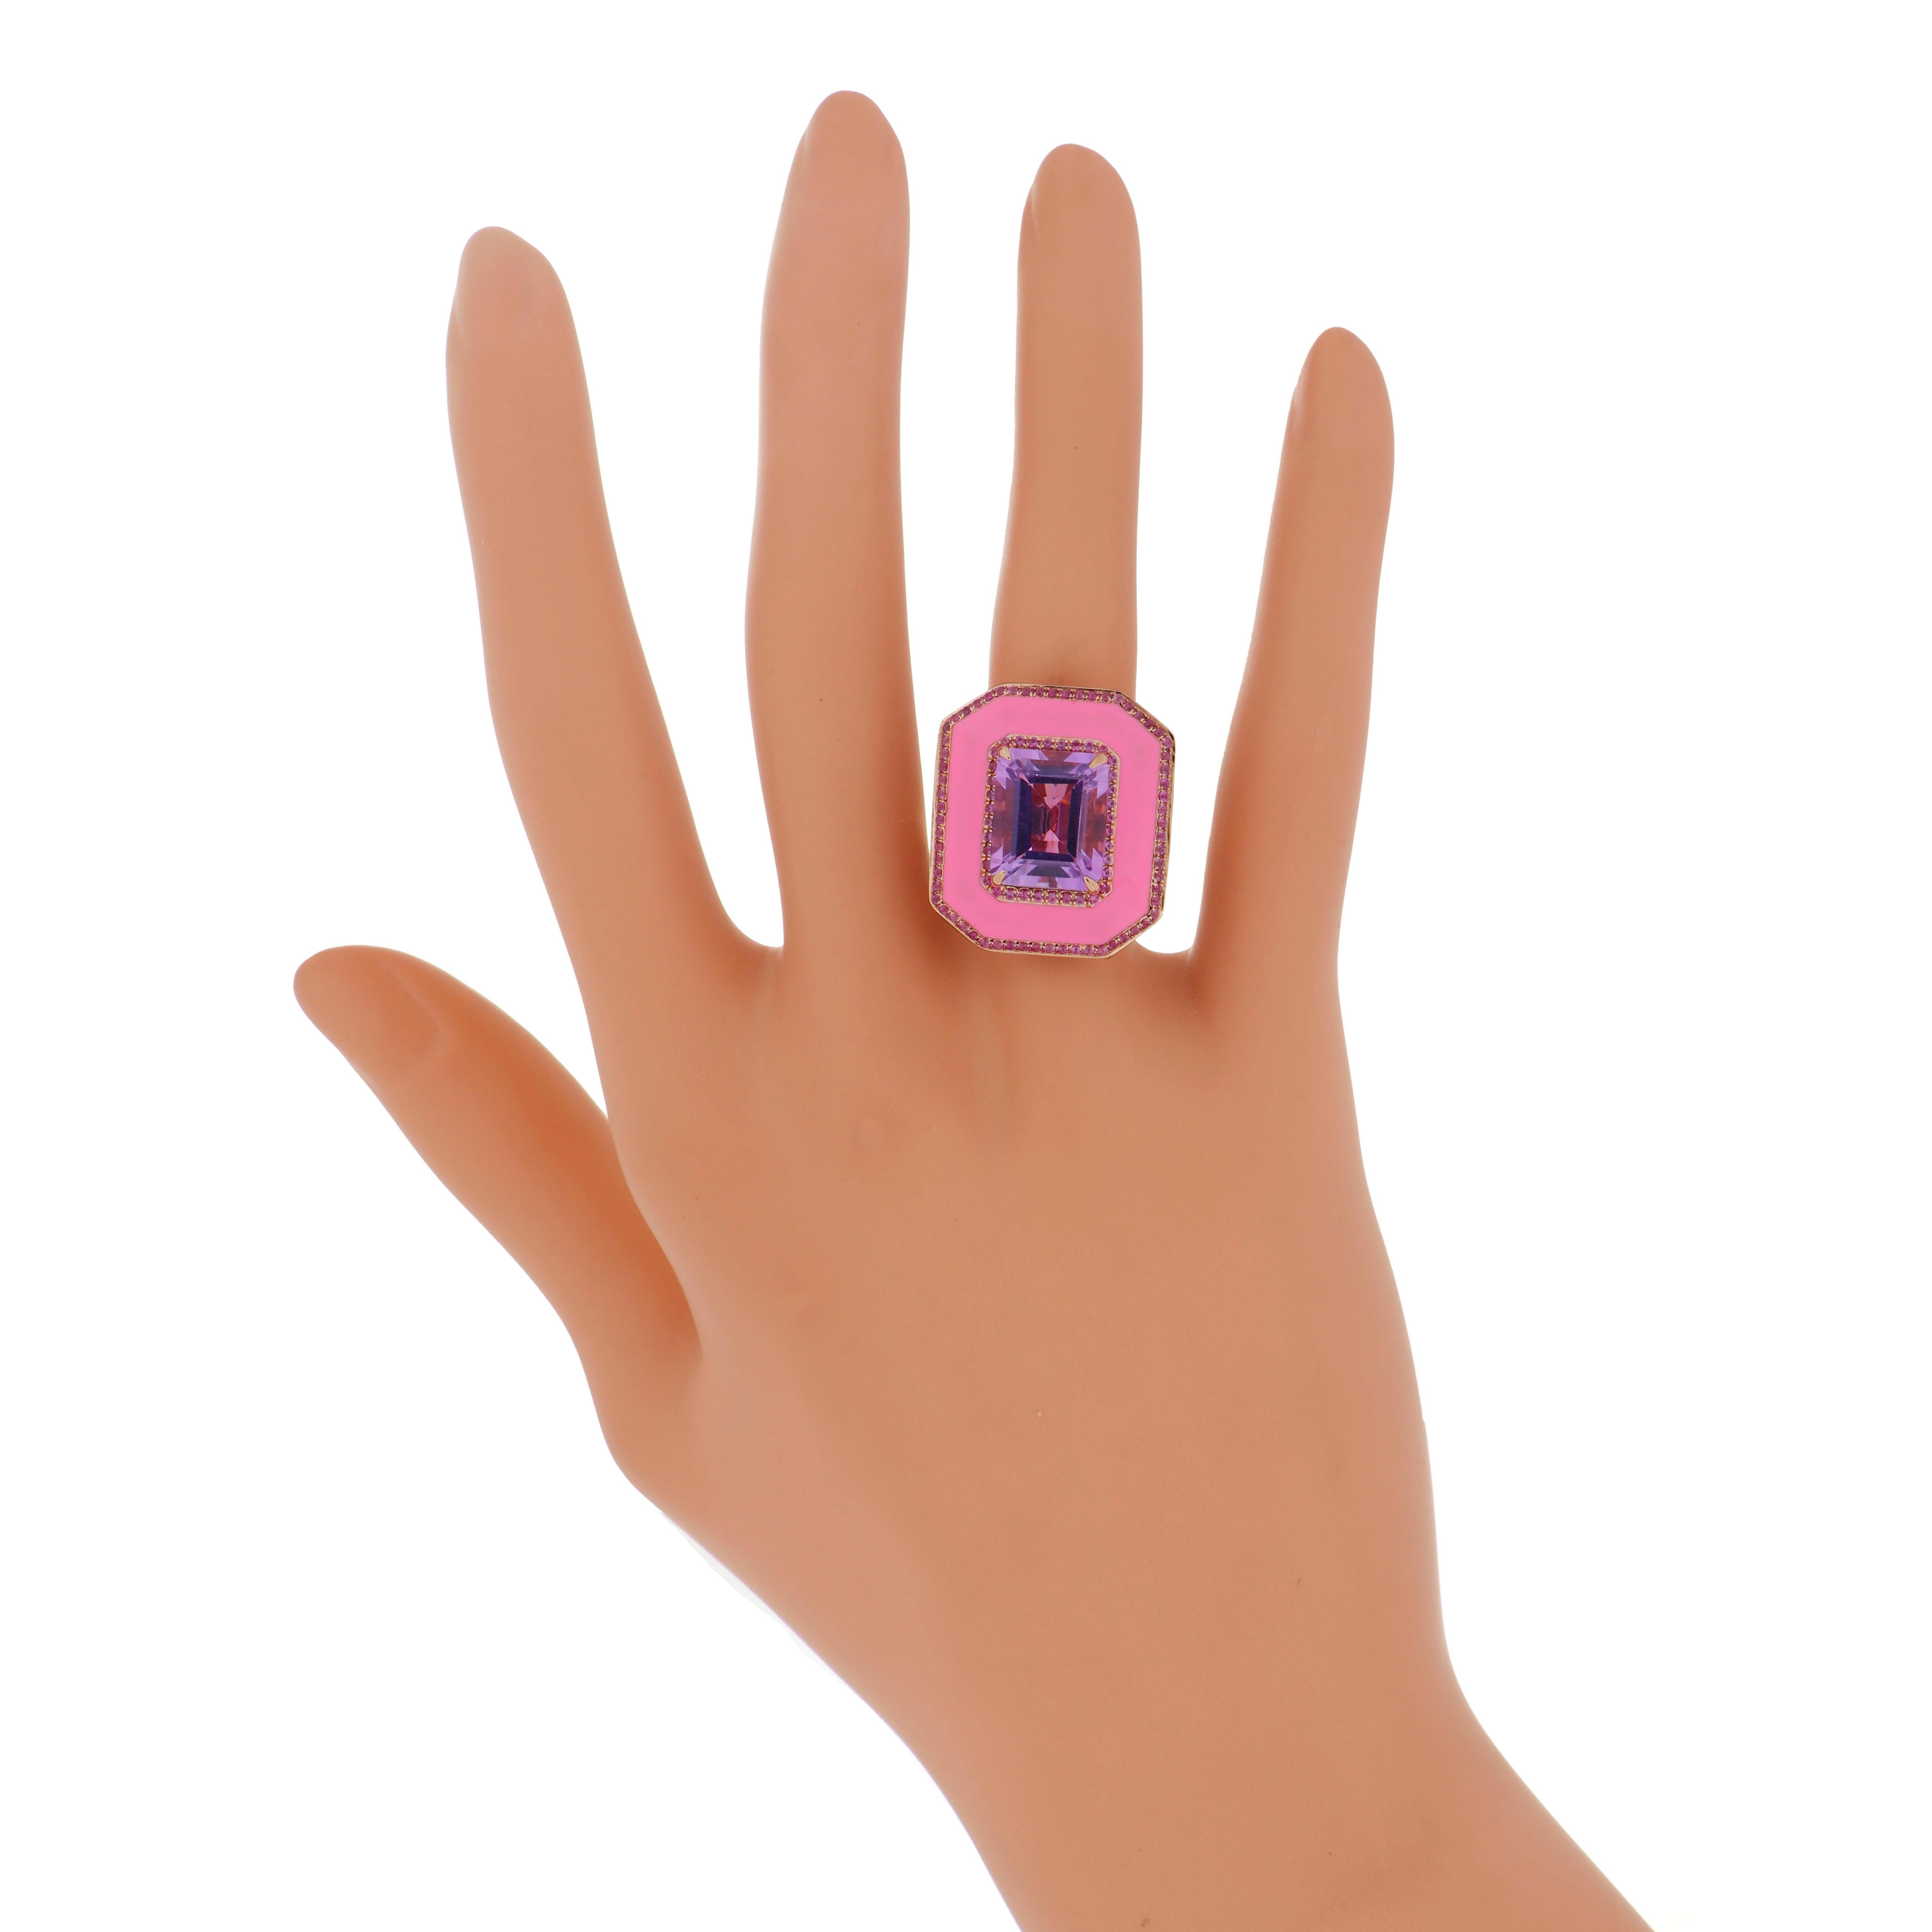  Pink Amethyst, Pink Sapphire & Diamond Ring with Enamel in 14k Rose Gold  For Sale 2